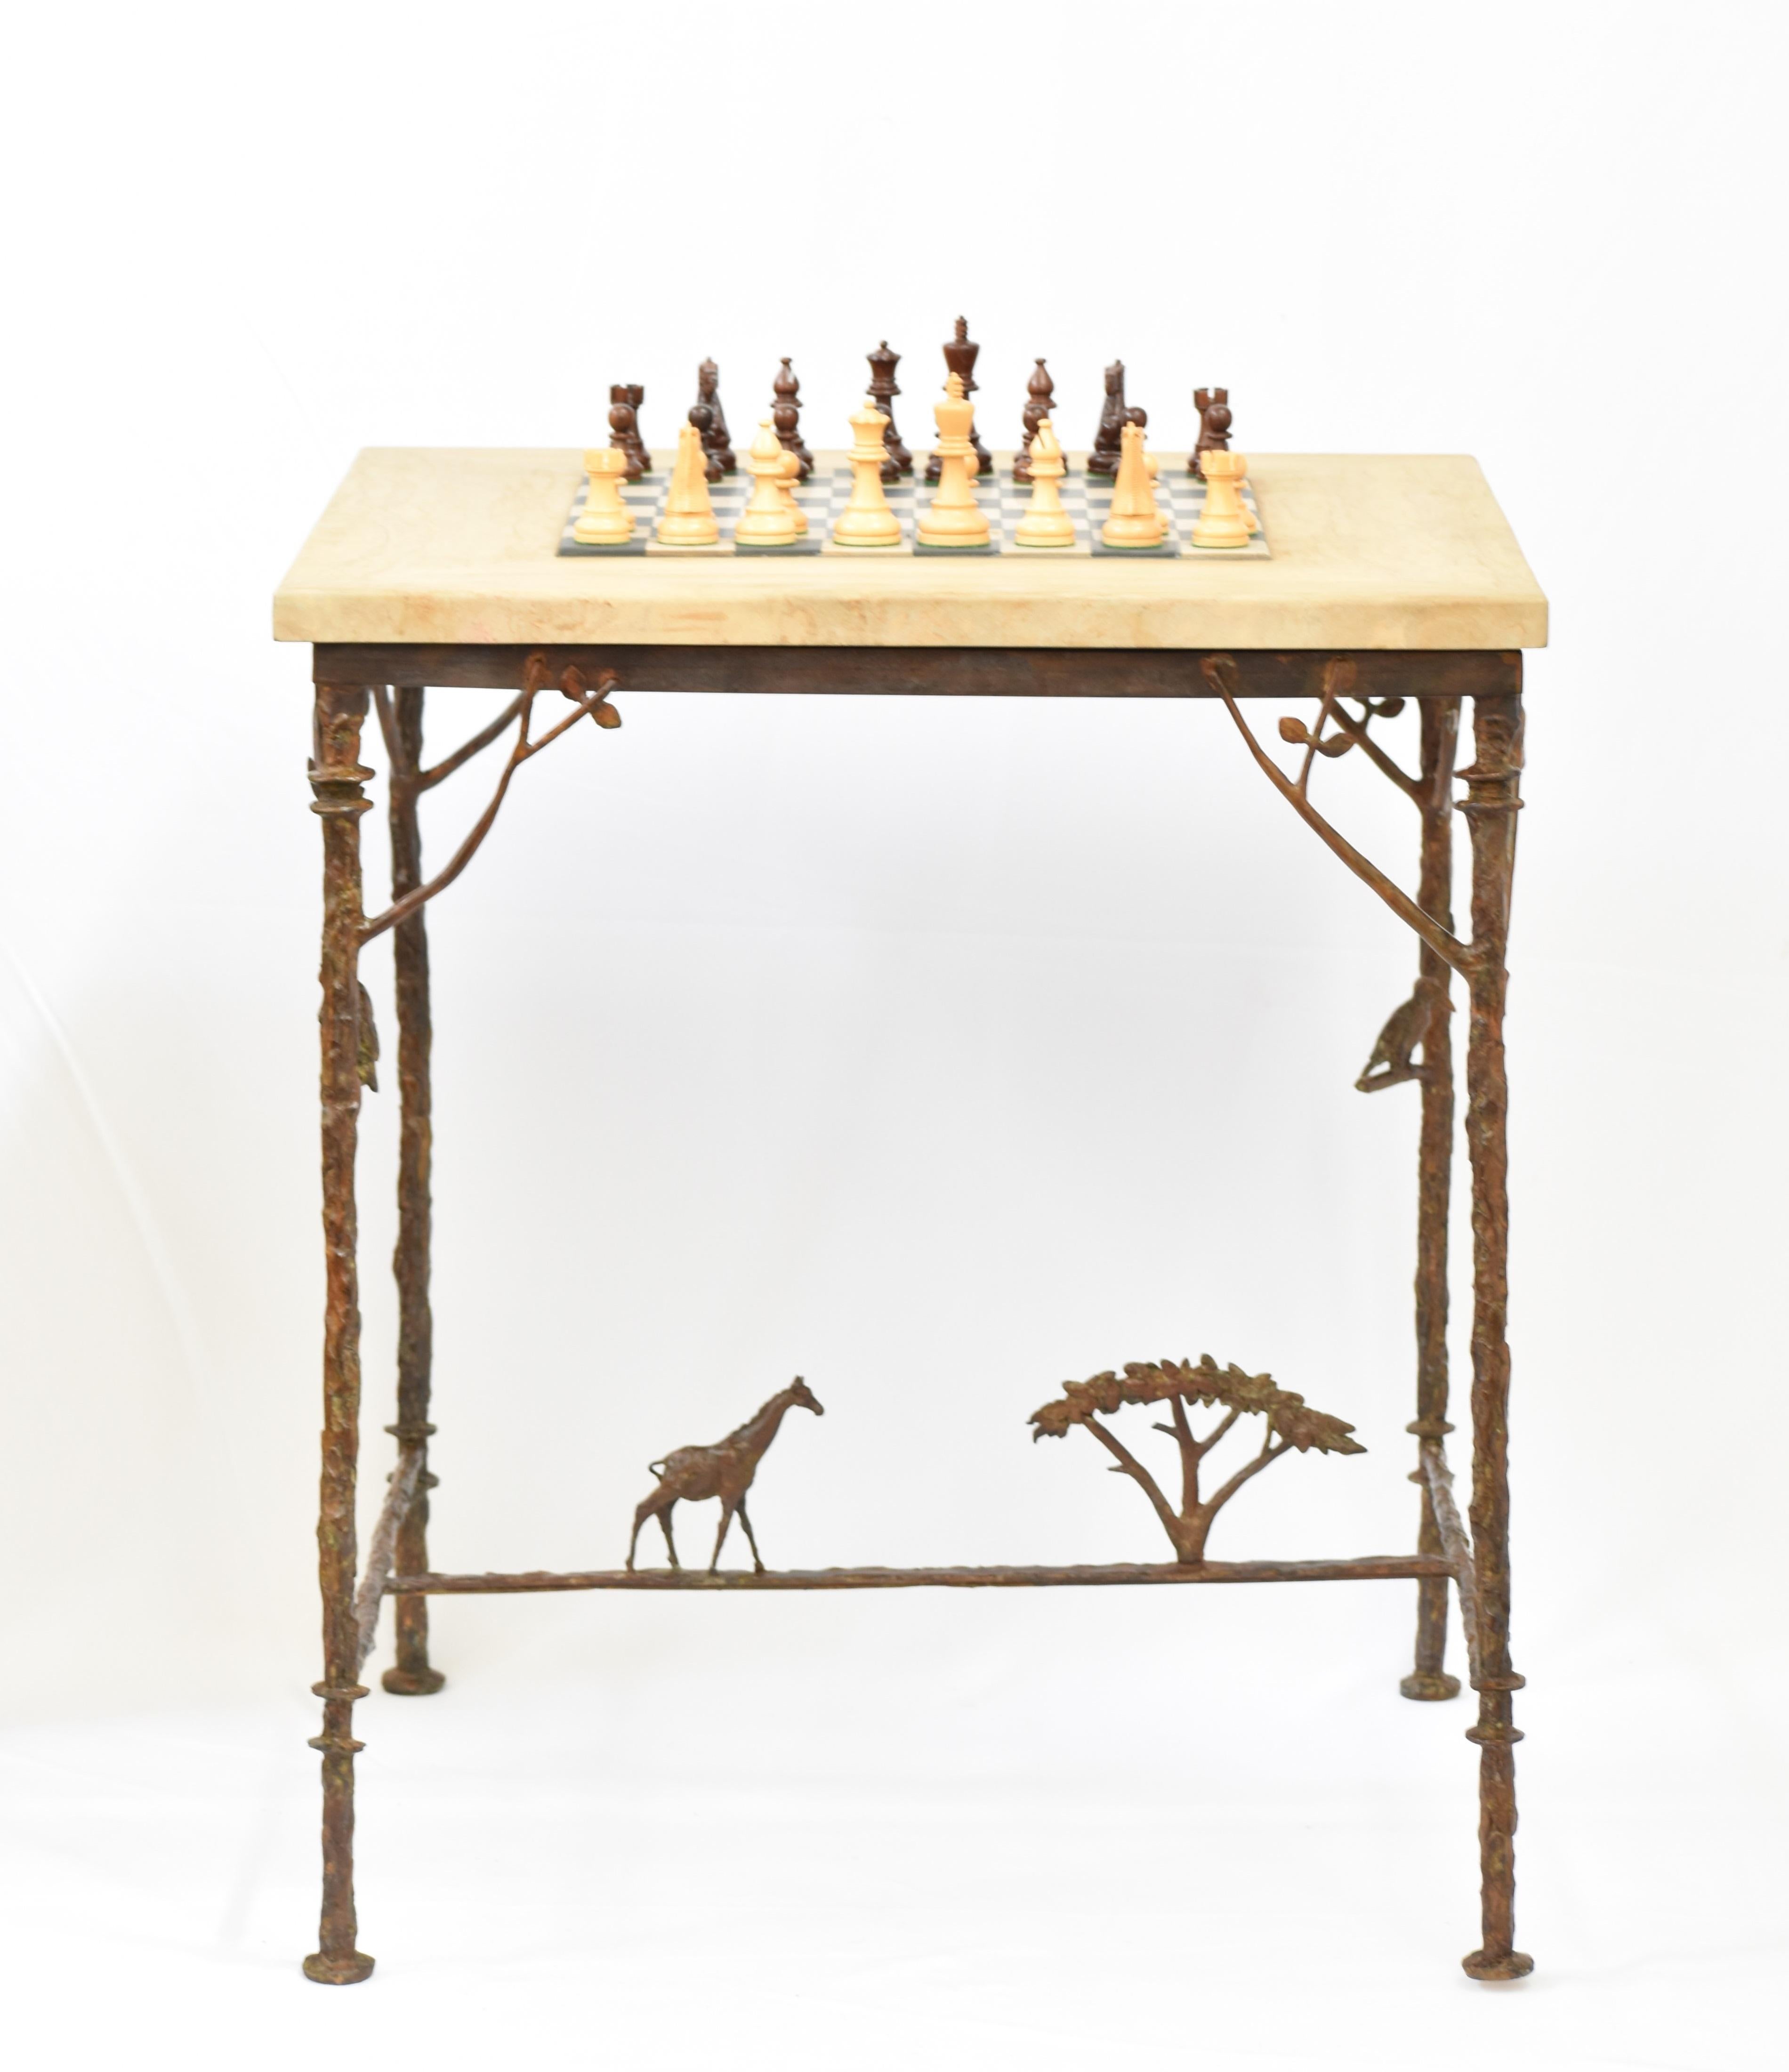 Chess Table in cast bronze
Bespoke Table in cast Bronze inspired by Diego Giacometti with African theme with inset chess board made of sandstone and black slate.  Table featuring a giraffe, acacia tree, hornbill, owl, leaves and twigs - all